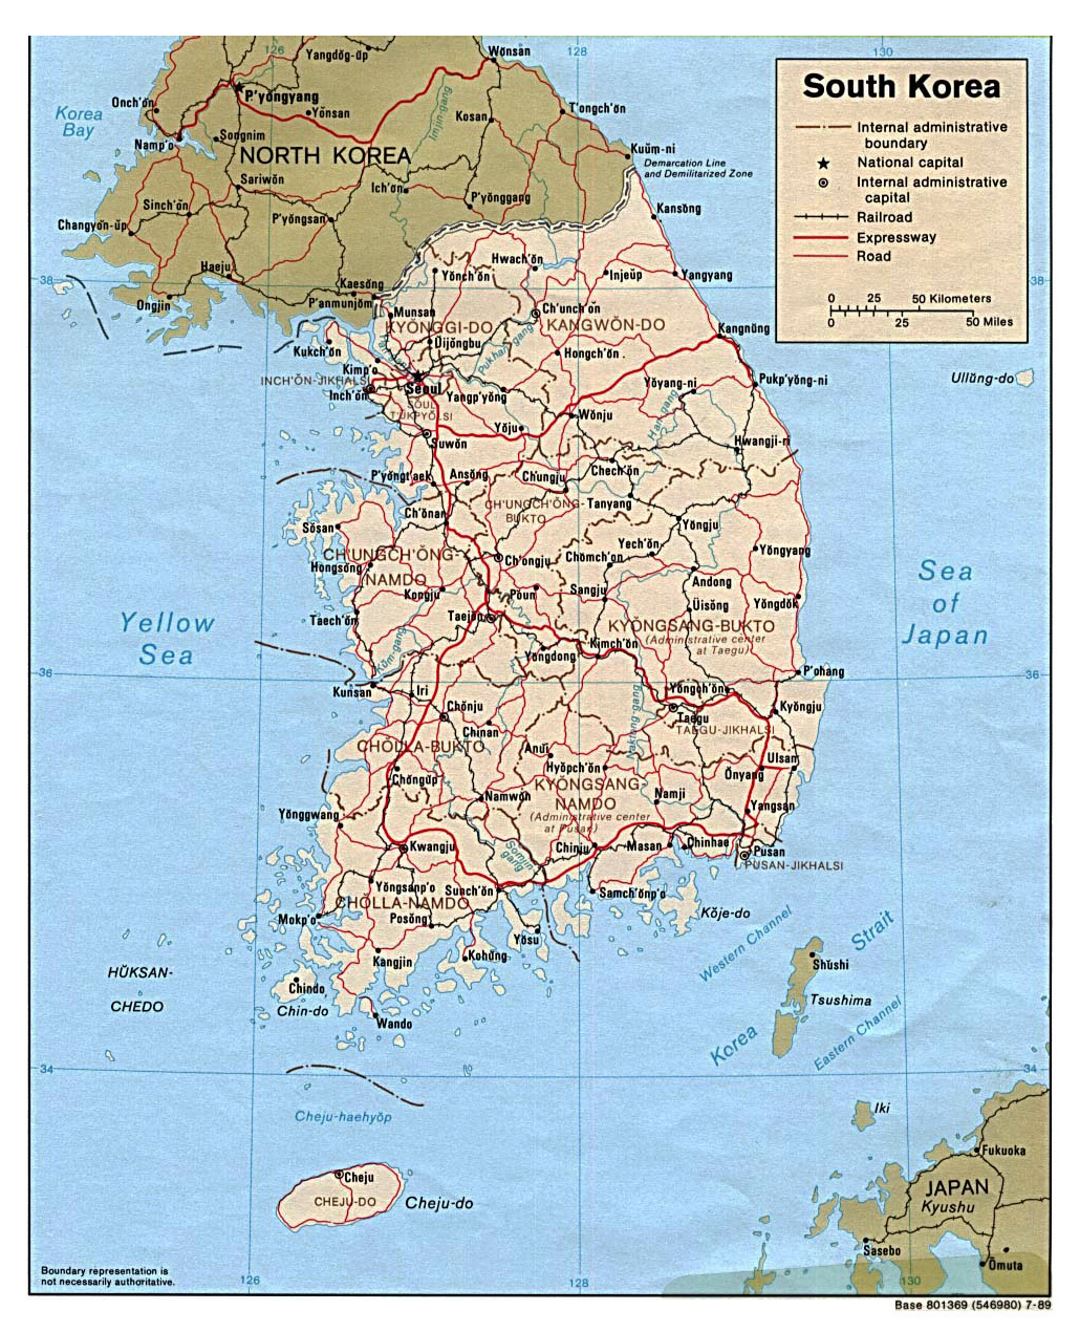 Detailed political and administrative map of South Korea with roads, railroads, and major cities - 1989